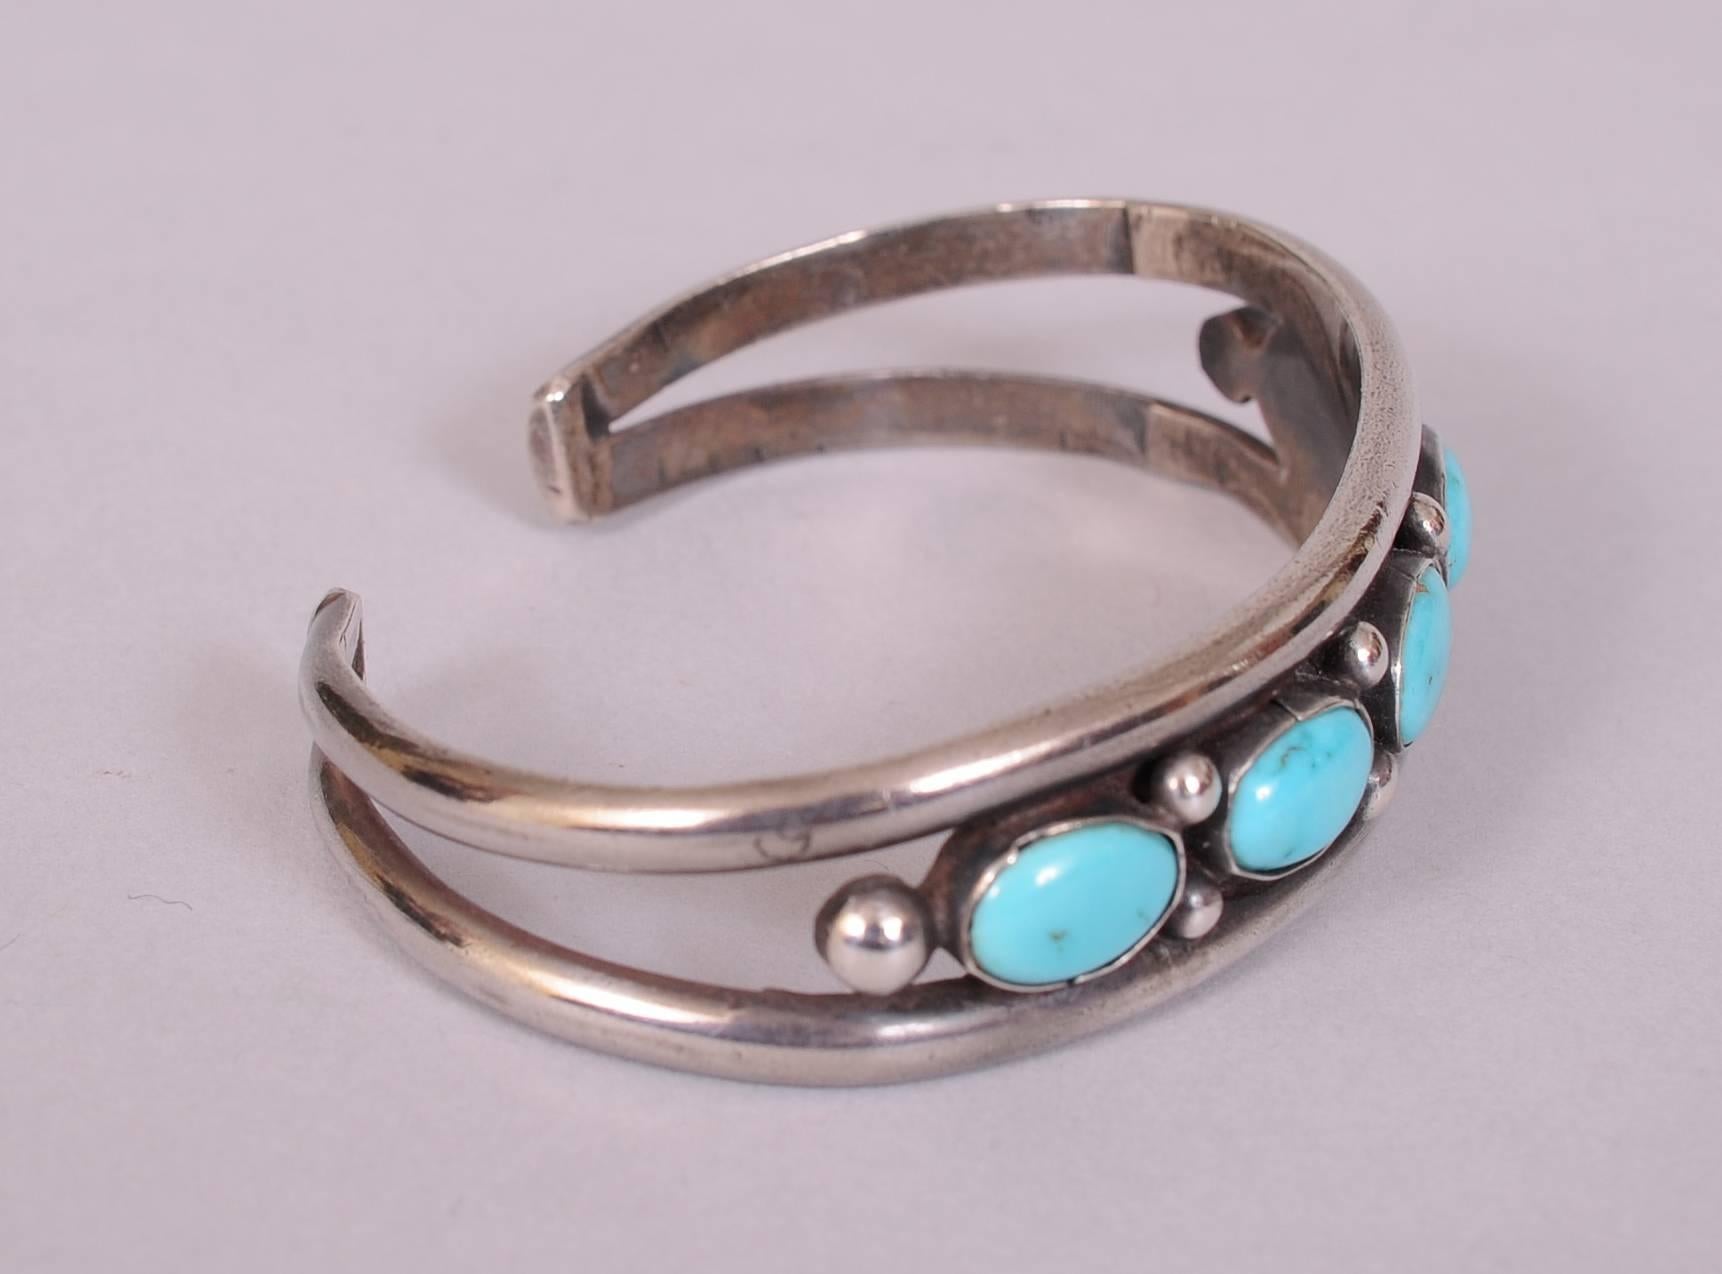 Five nice turquoise stones are enhanced by sterling silver balls and held in place by sterling bands at the top and bottom. These bands join together on the back of the bracelet. It has a lovely patina, but would be easy to polish if you desire a